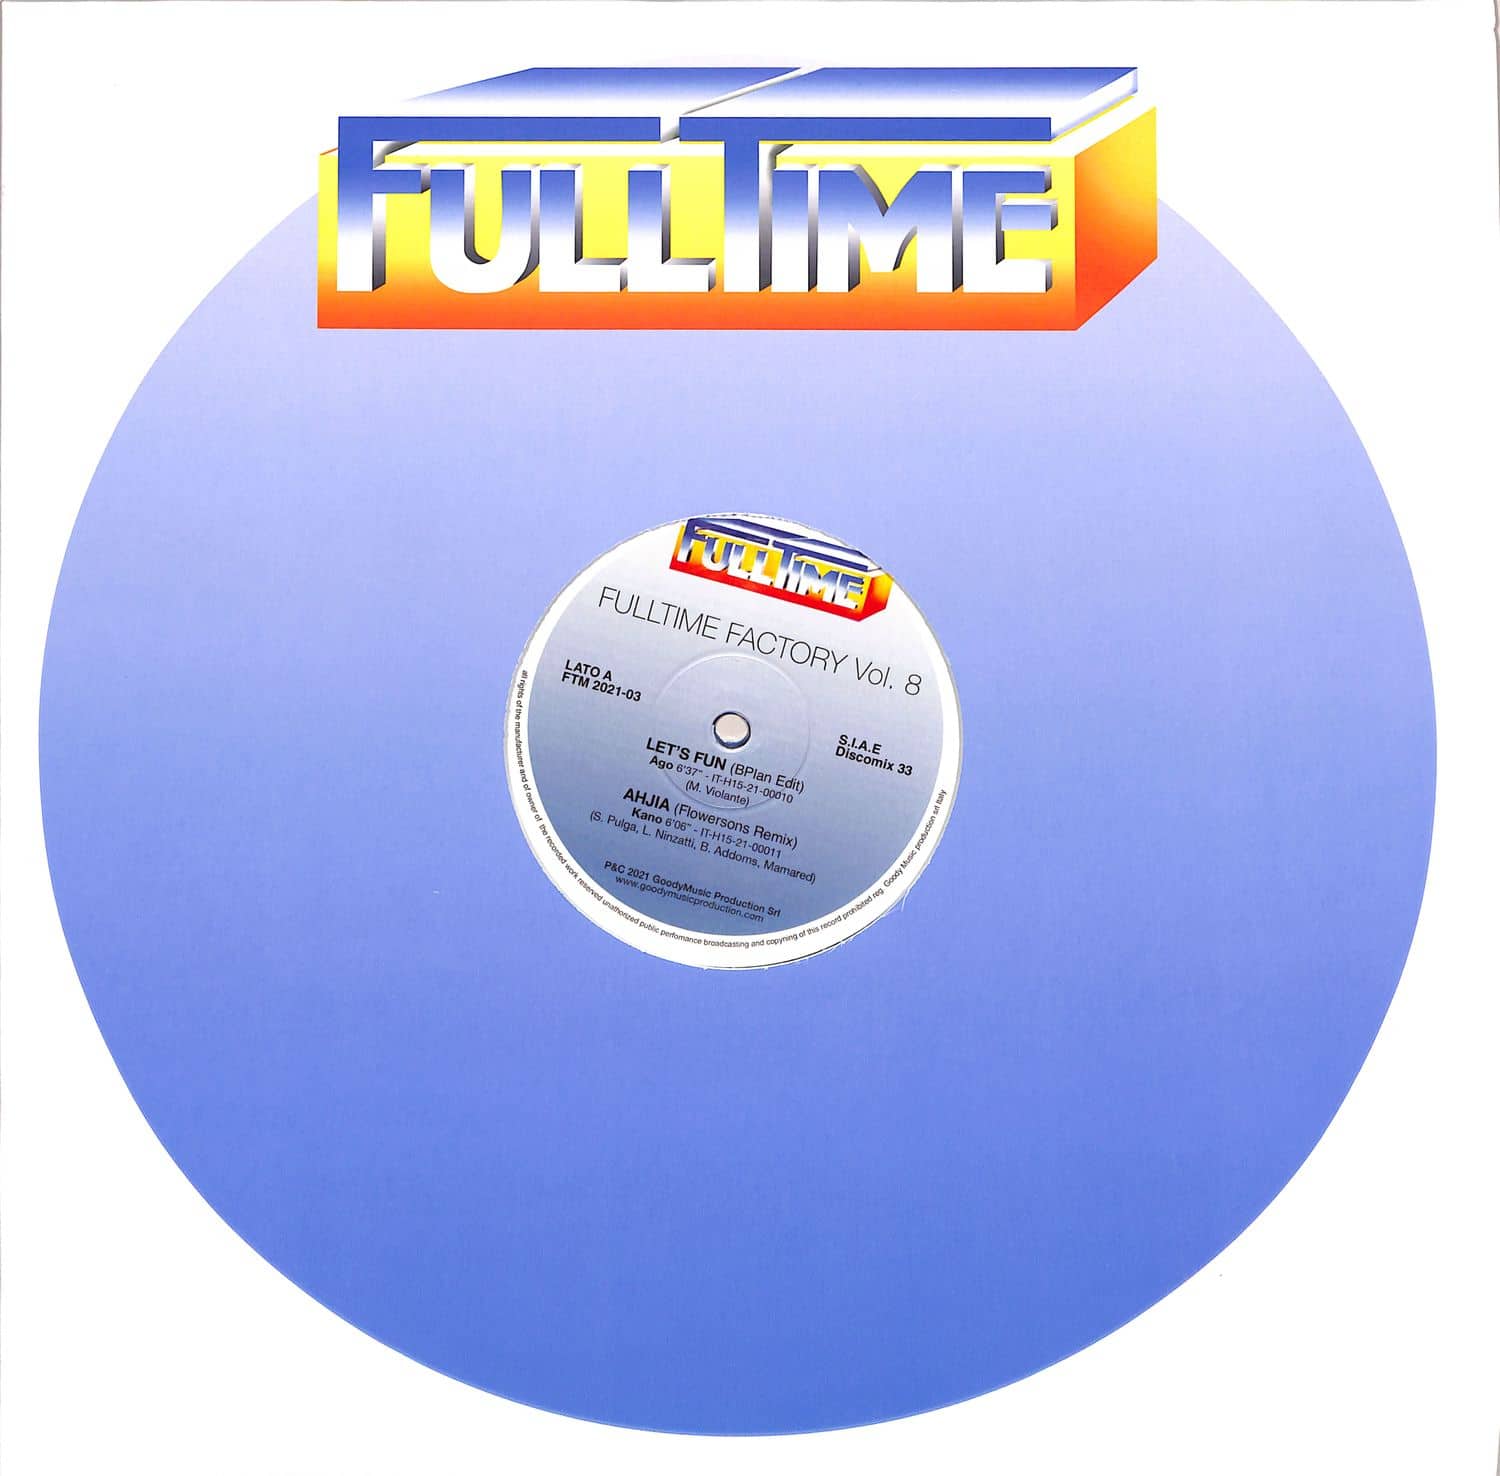 Ago / Kano / Sign Of The Times / Rainbow Team - FULLTIME FACTORY VOLUME 8 